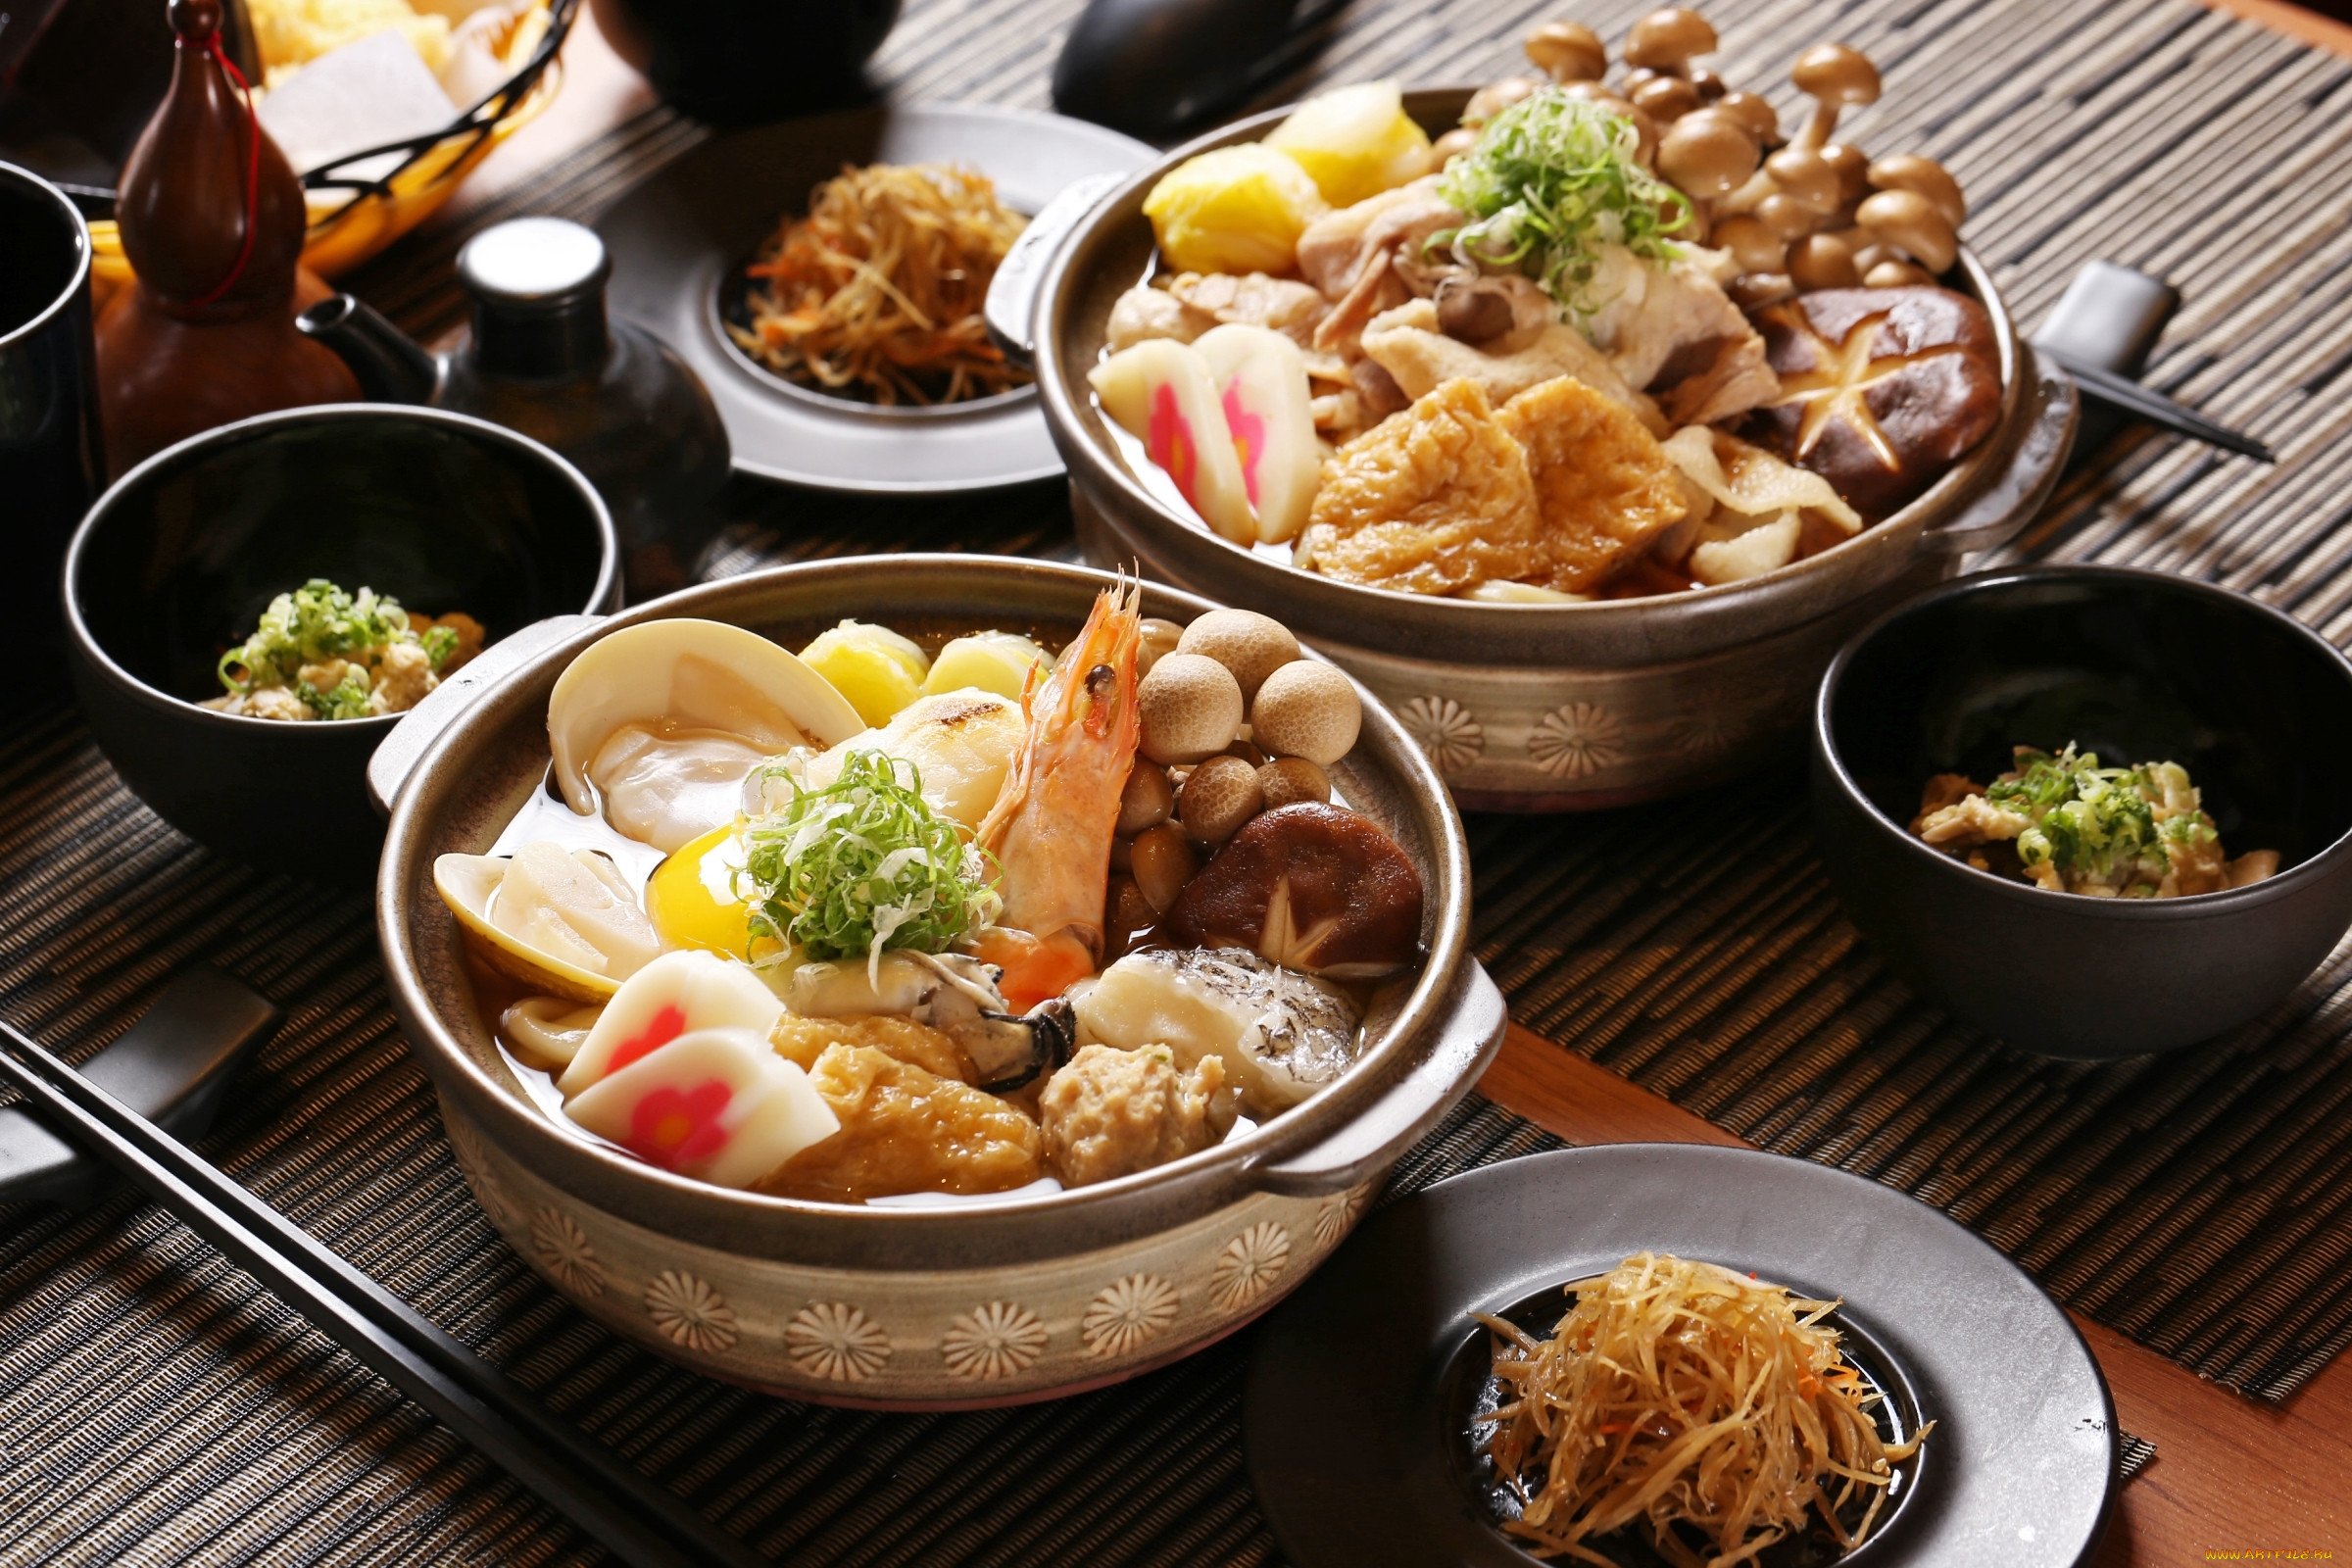 Food popularized in asian cuisine